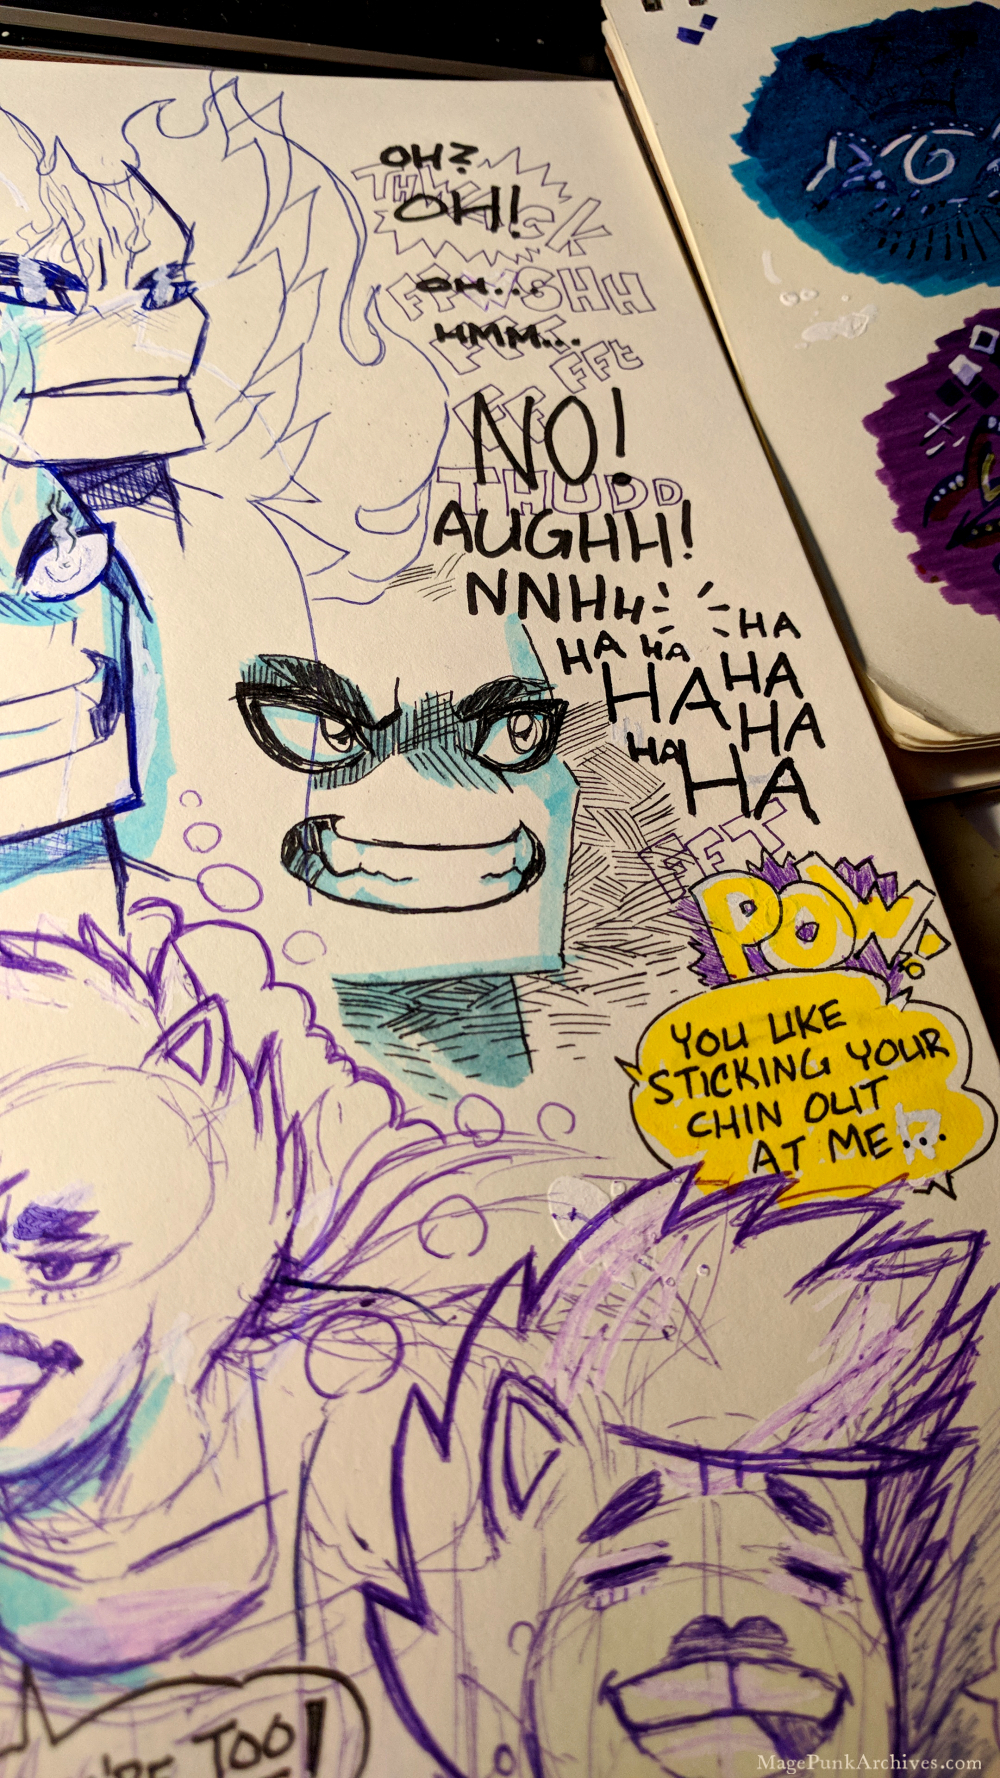 Lettering Practice in the upper right corner of the first page of the new sketchbook. It reads:
Oh?
OH!
oh...
mmm..
NO!
AUGHH!
NNHh 
Ha  ha  haa
haha
hahaha

sfx: POW!

You like sticking your chin out at me...